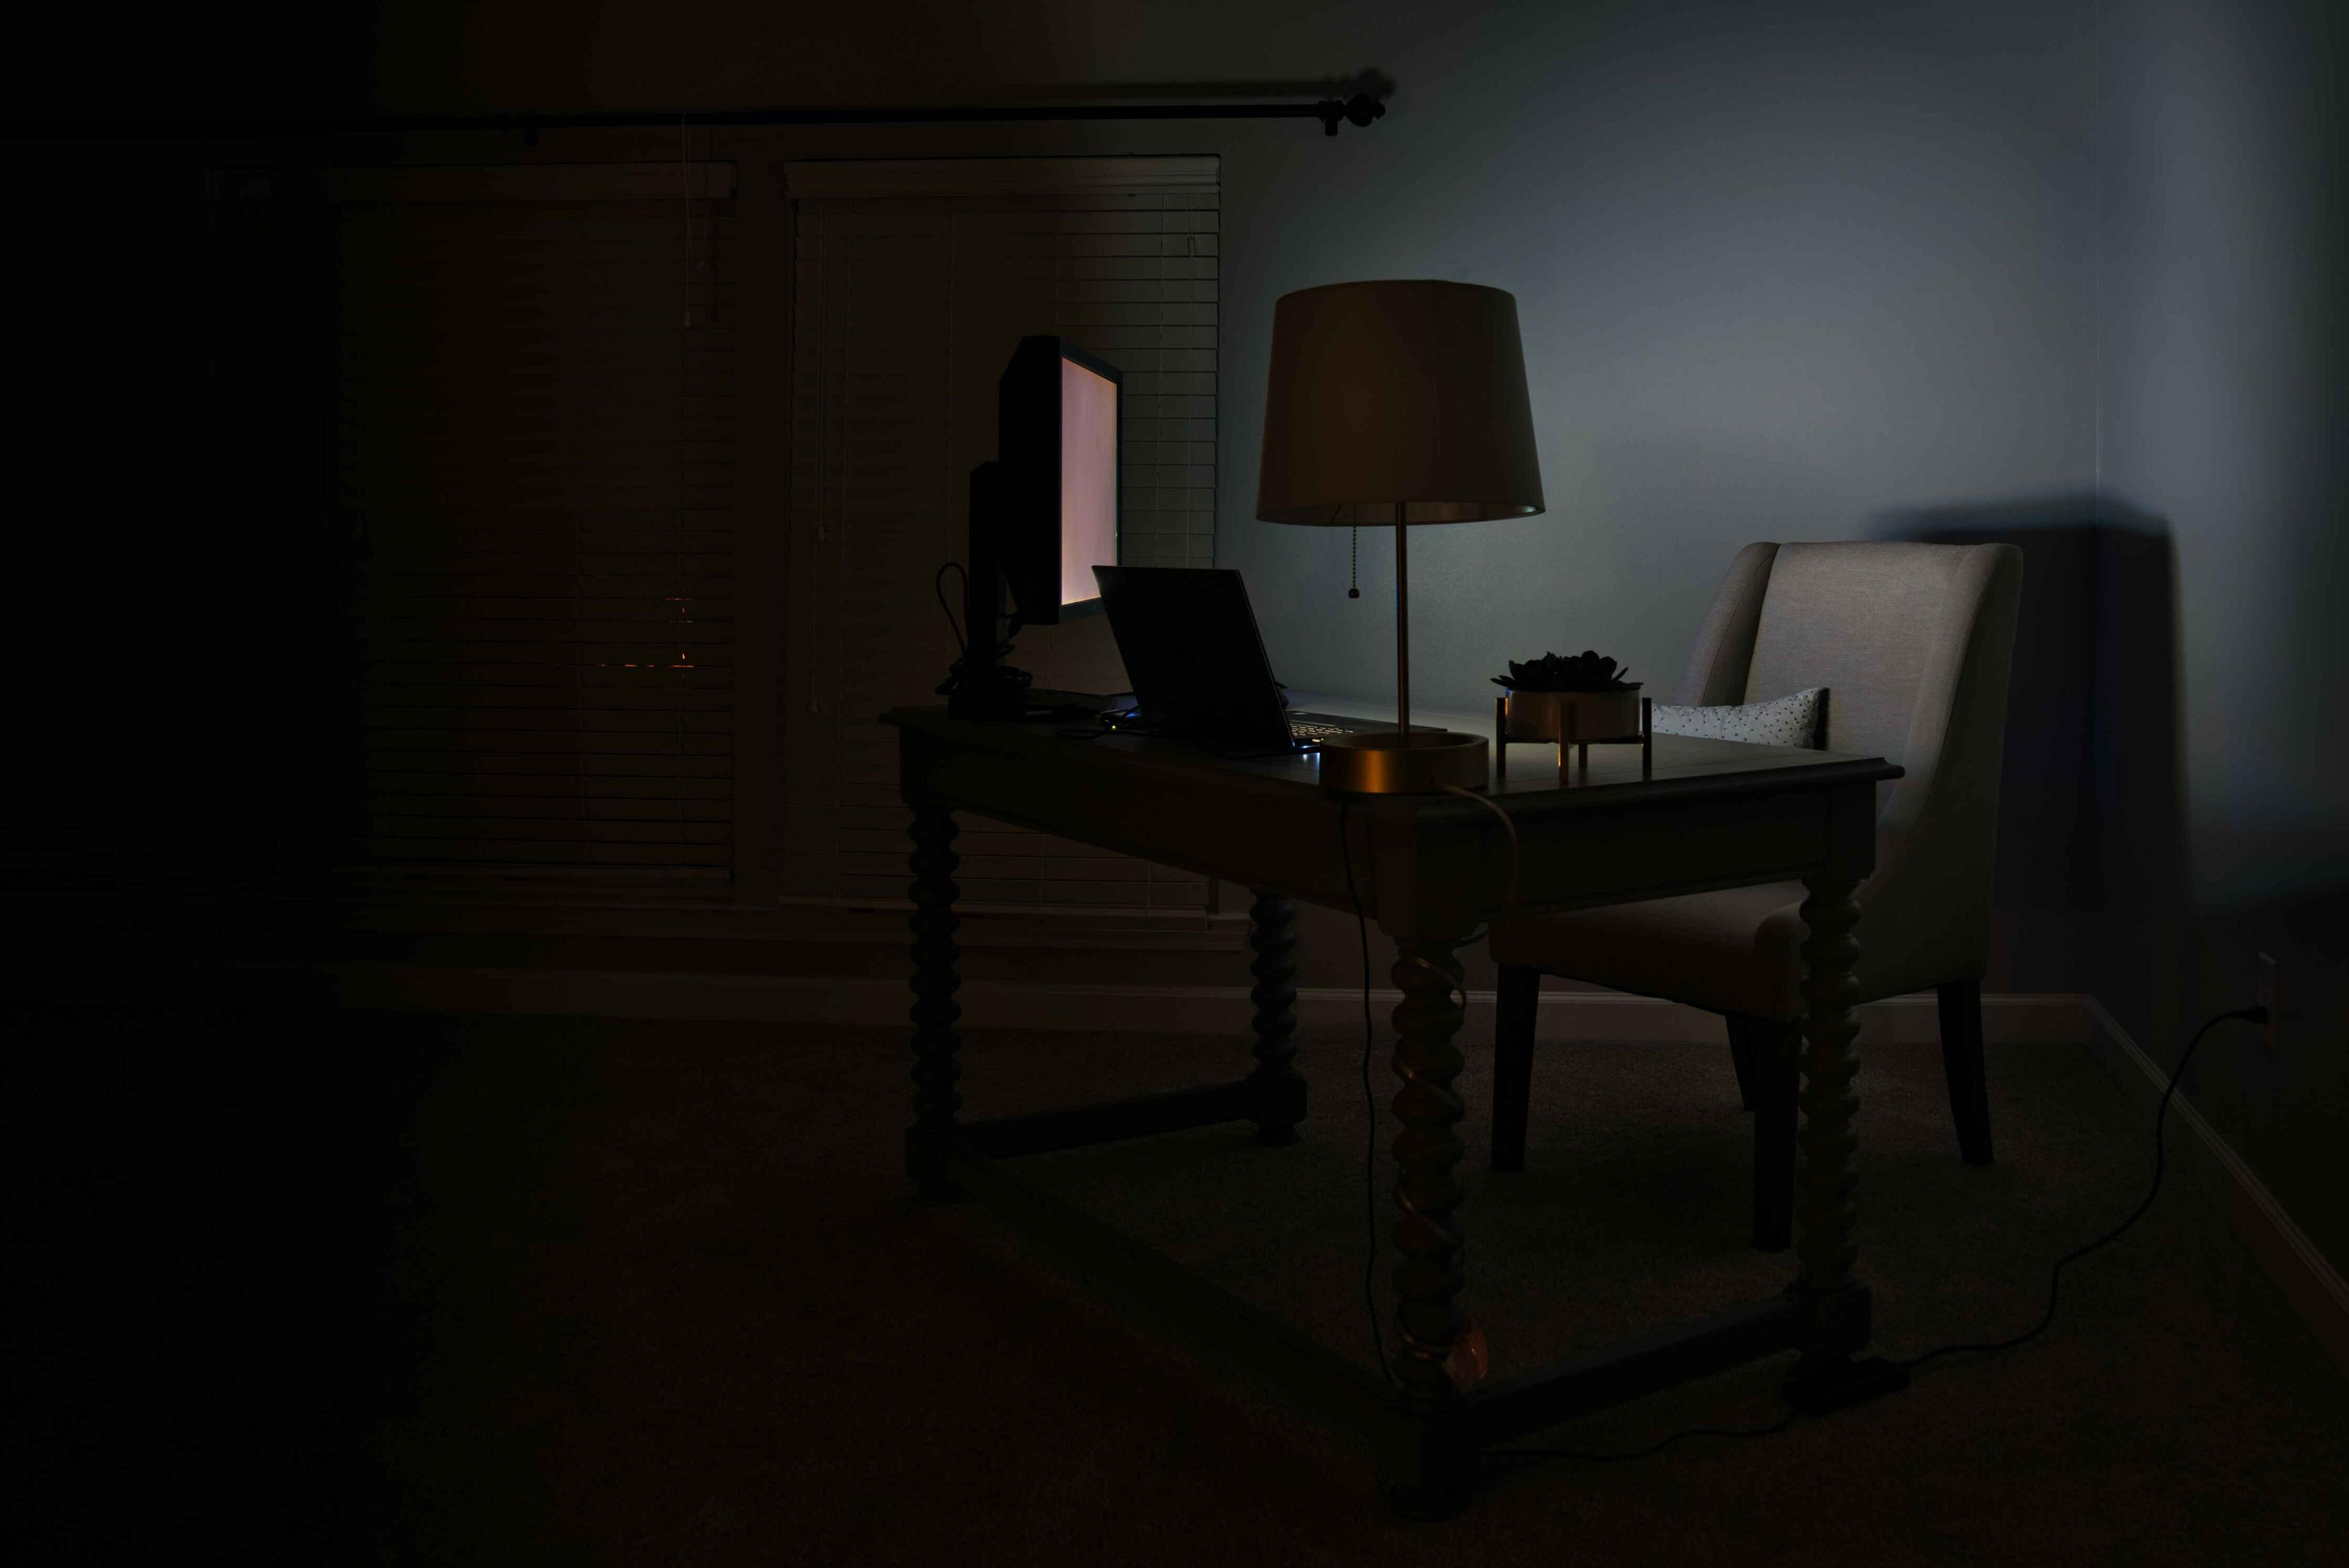 A dark room with a desk that has a plant, laptop, lamp, and a lit-up computer screen on top of it next to a leather chair.